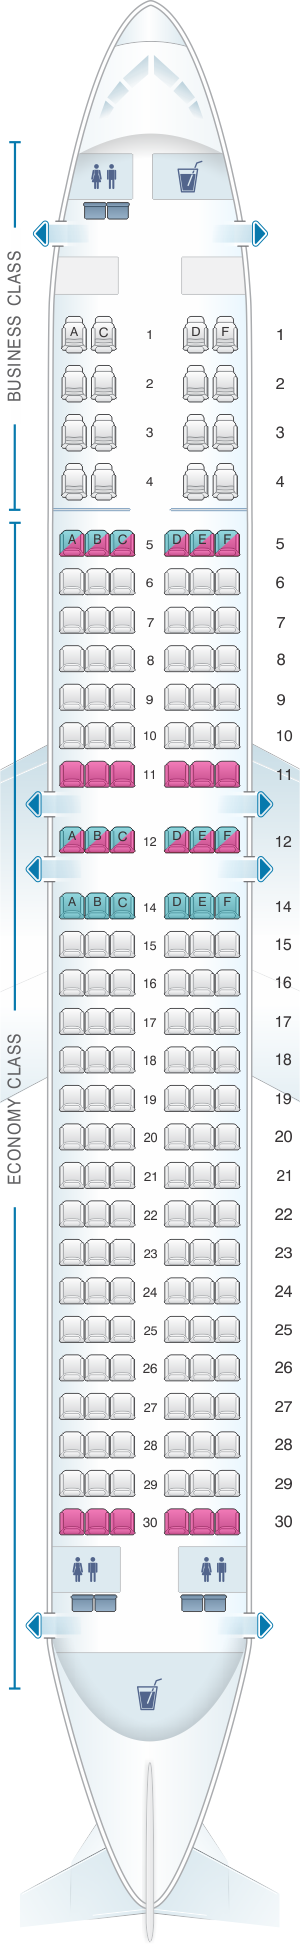 Seat Map Malaysia Airlines Boeing B737 800 166pax Seatmaestro